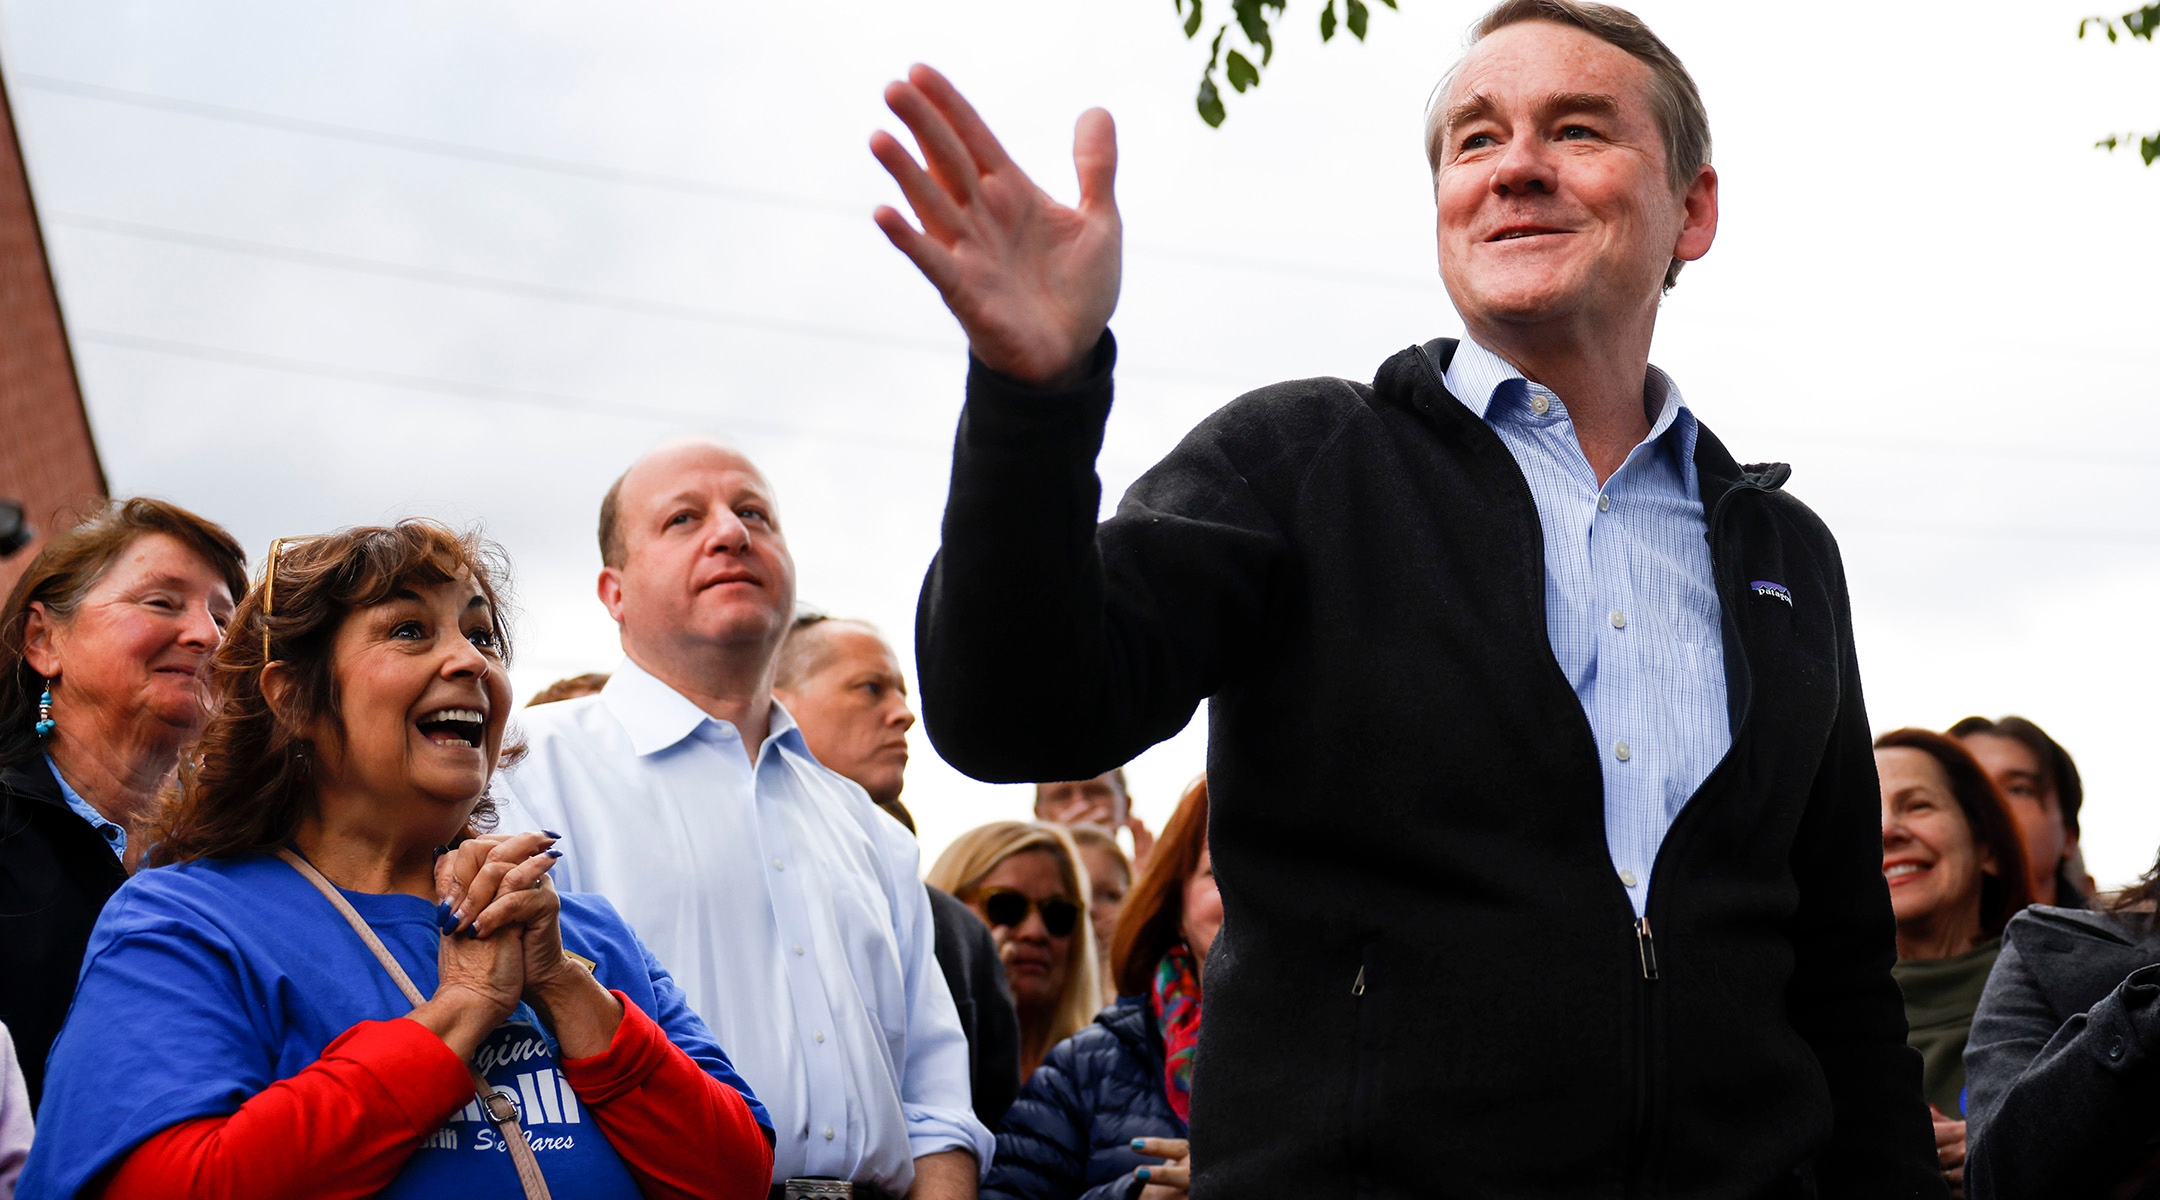 Michael Bennet speaks to supporters at a rally outside Mountain Toad Brewing in Golden, Colo., Oct. 26, 2022. (Michael Ciaglo/Getty Images)